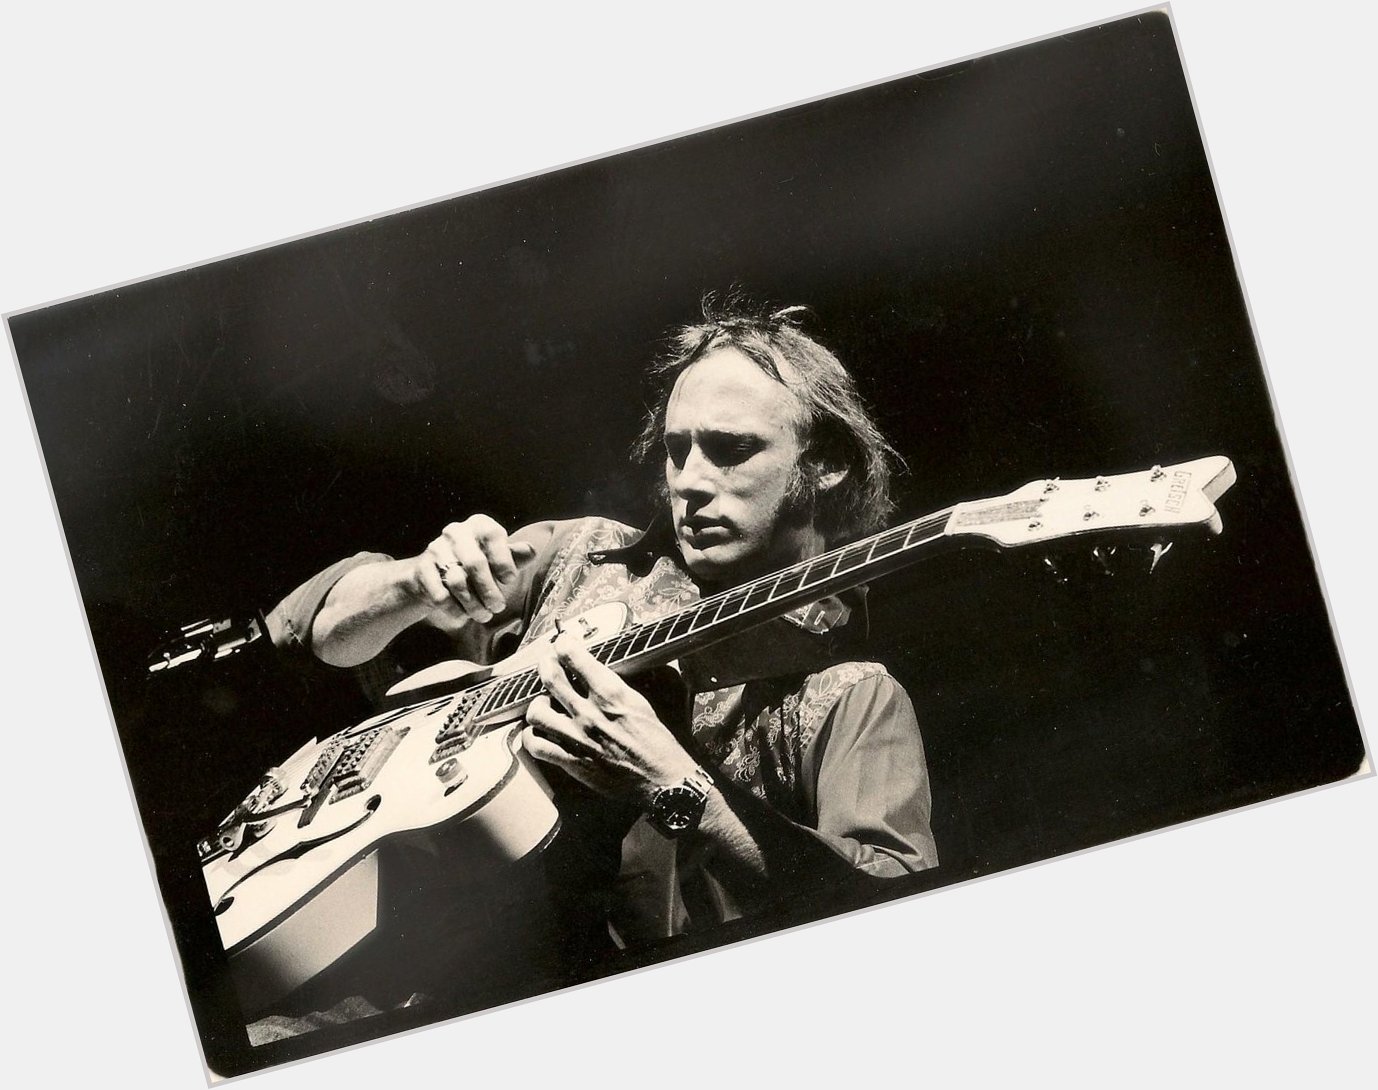 Happy bday Stephen Stills!  begins his 7th decade on Earth. HBD Captain Manyhands! 